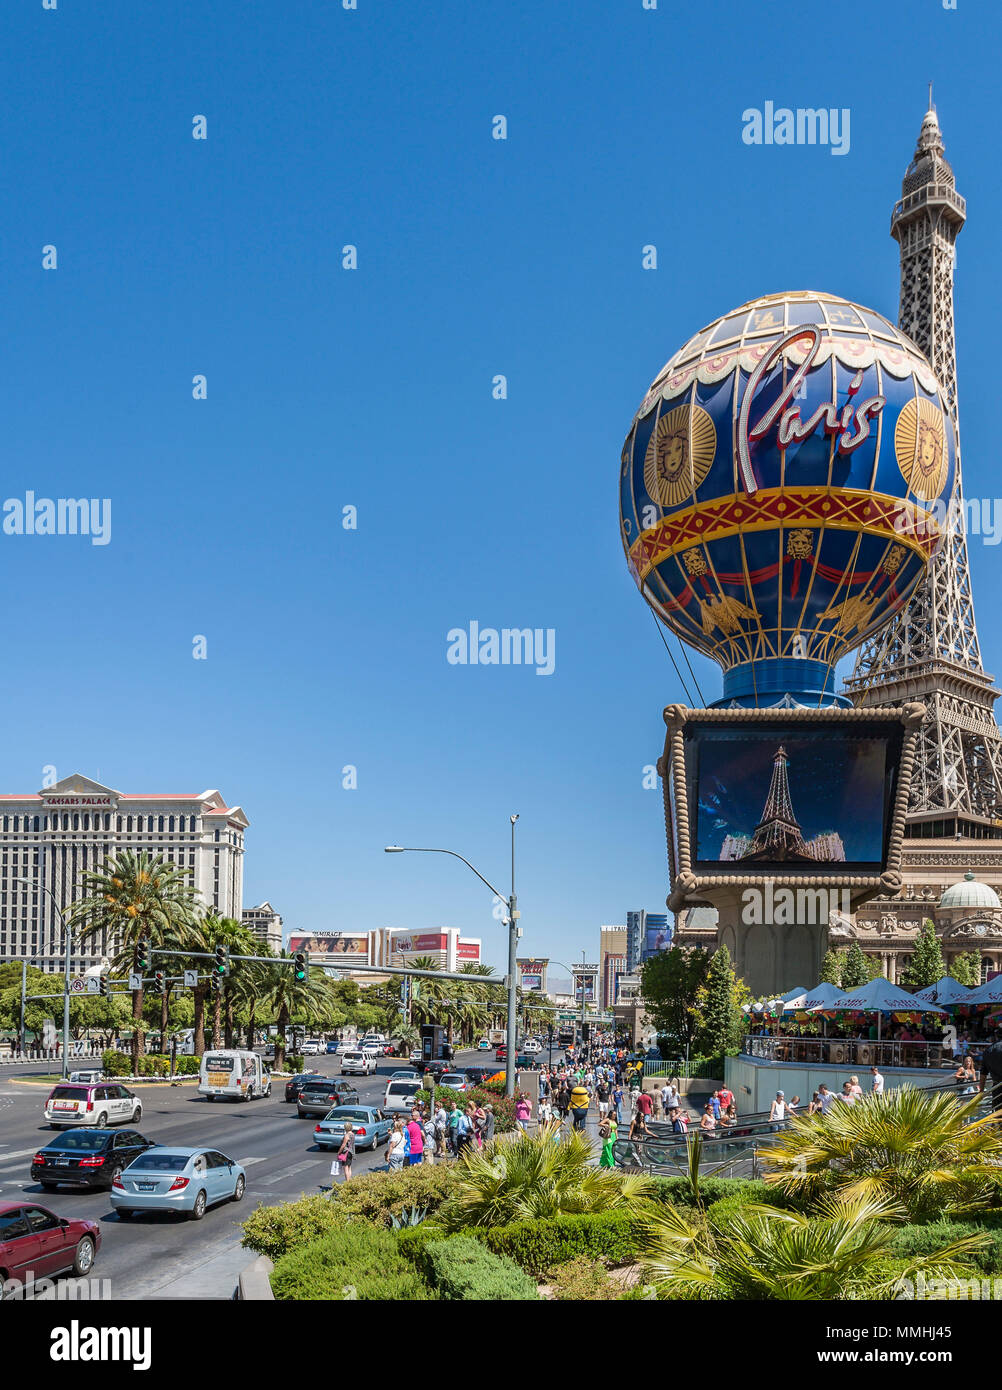 Crowds of tourists and vehicles on Las Vegas Boulevard on the Las Vegas Strip in Paradise, Nevada Stock Photo